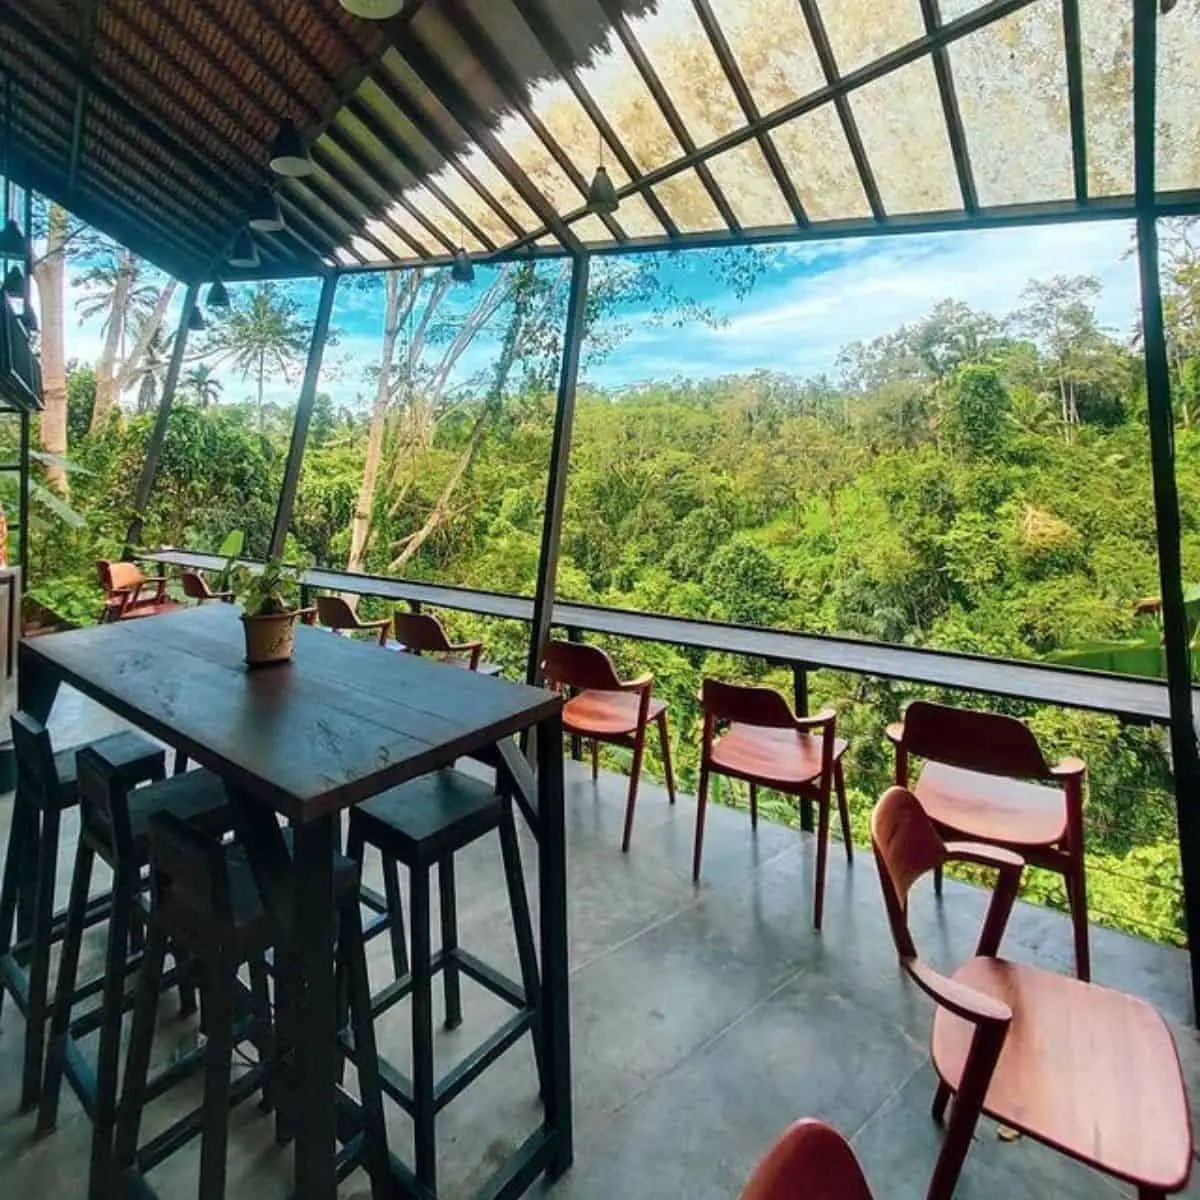 Keliki coffee cafe with a view of the Ubud forest